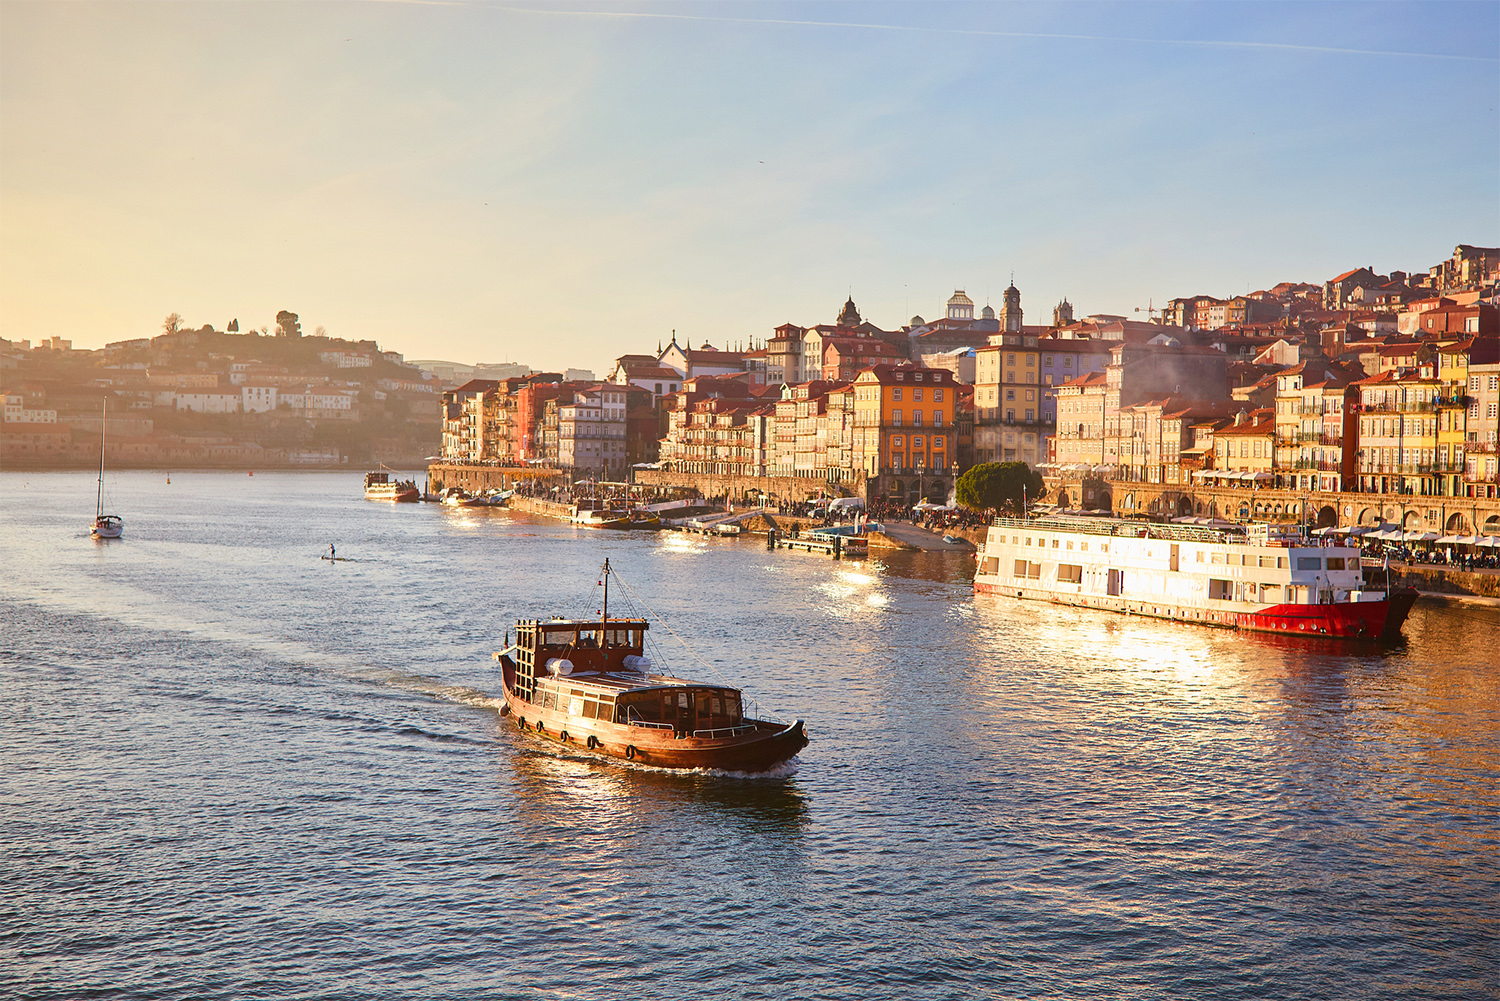 Ribeira riverbank is the beating heart of the city